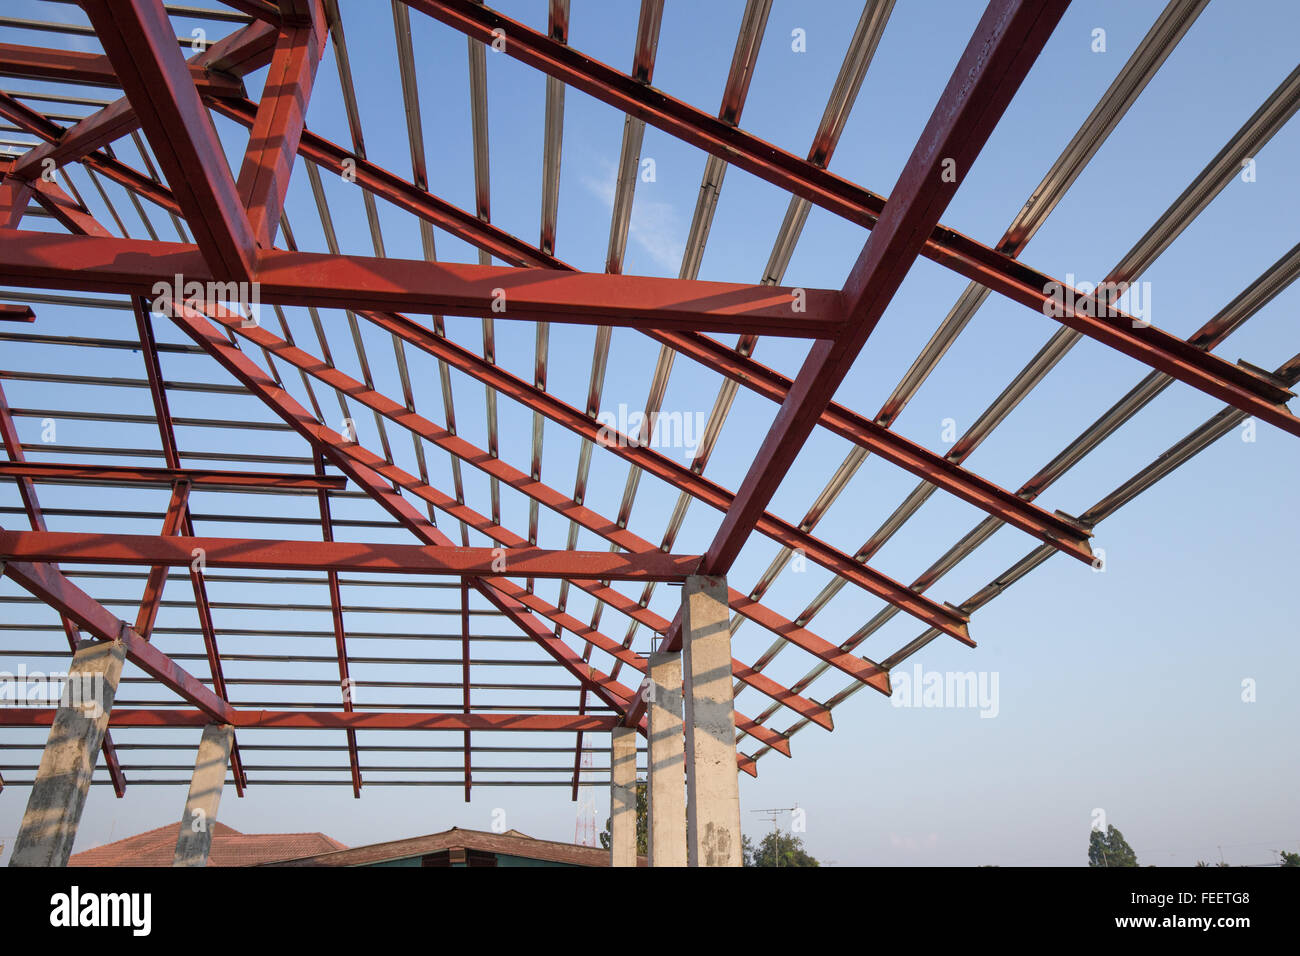 Structural Steel Beam On Roof Of Building Residential Construction With